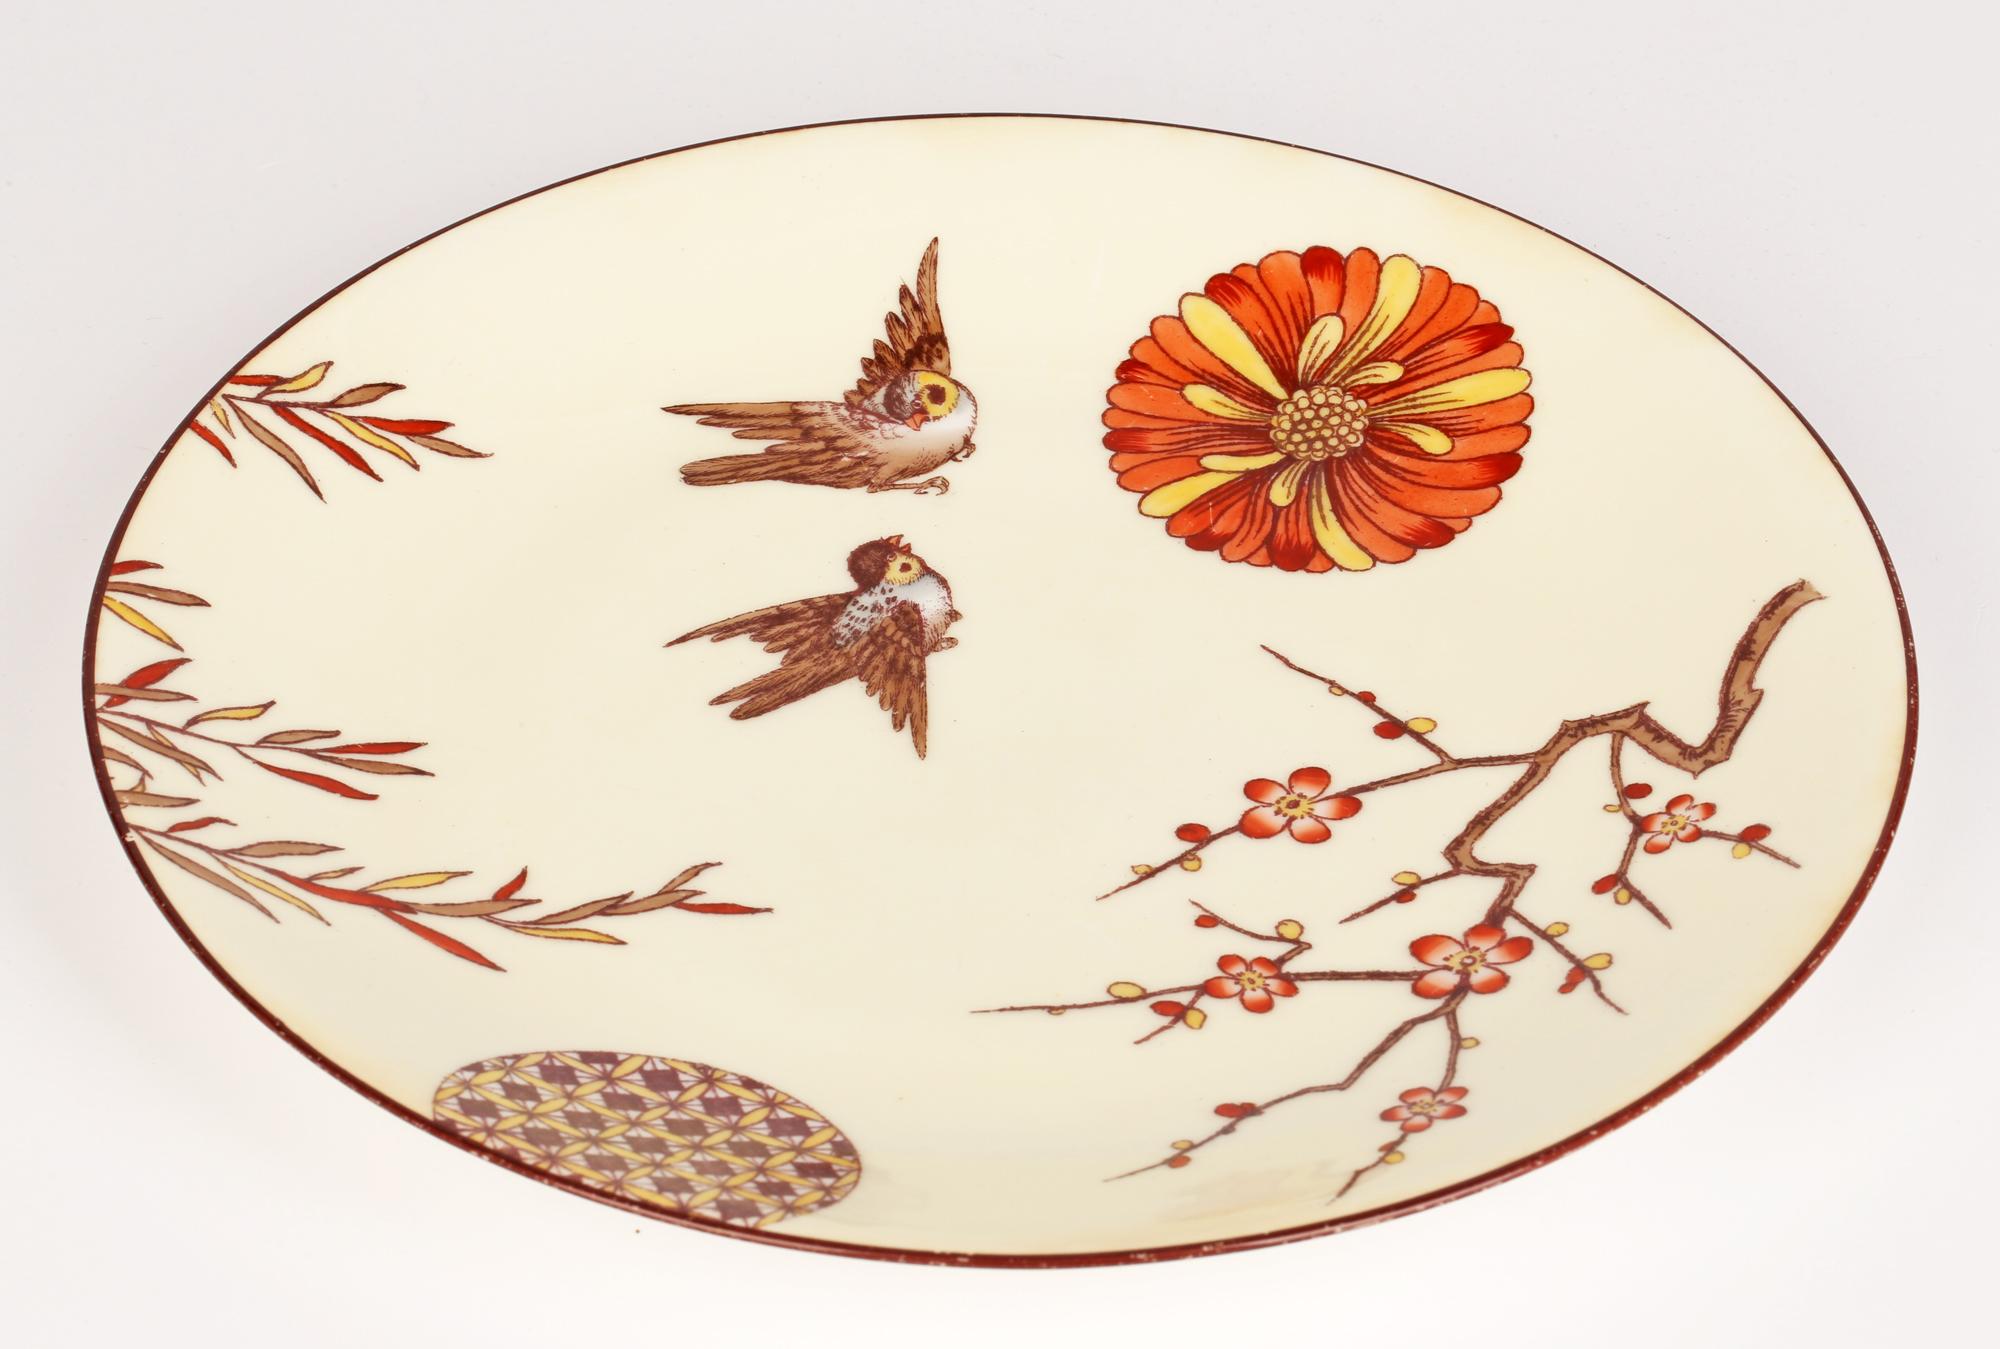 Hand-Painted Minton Porcelain Cabinet Plate Attributed to Christopher Dresser, 1880 For Sale